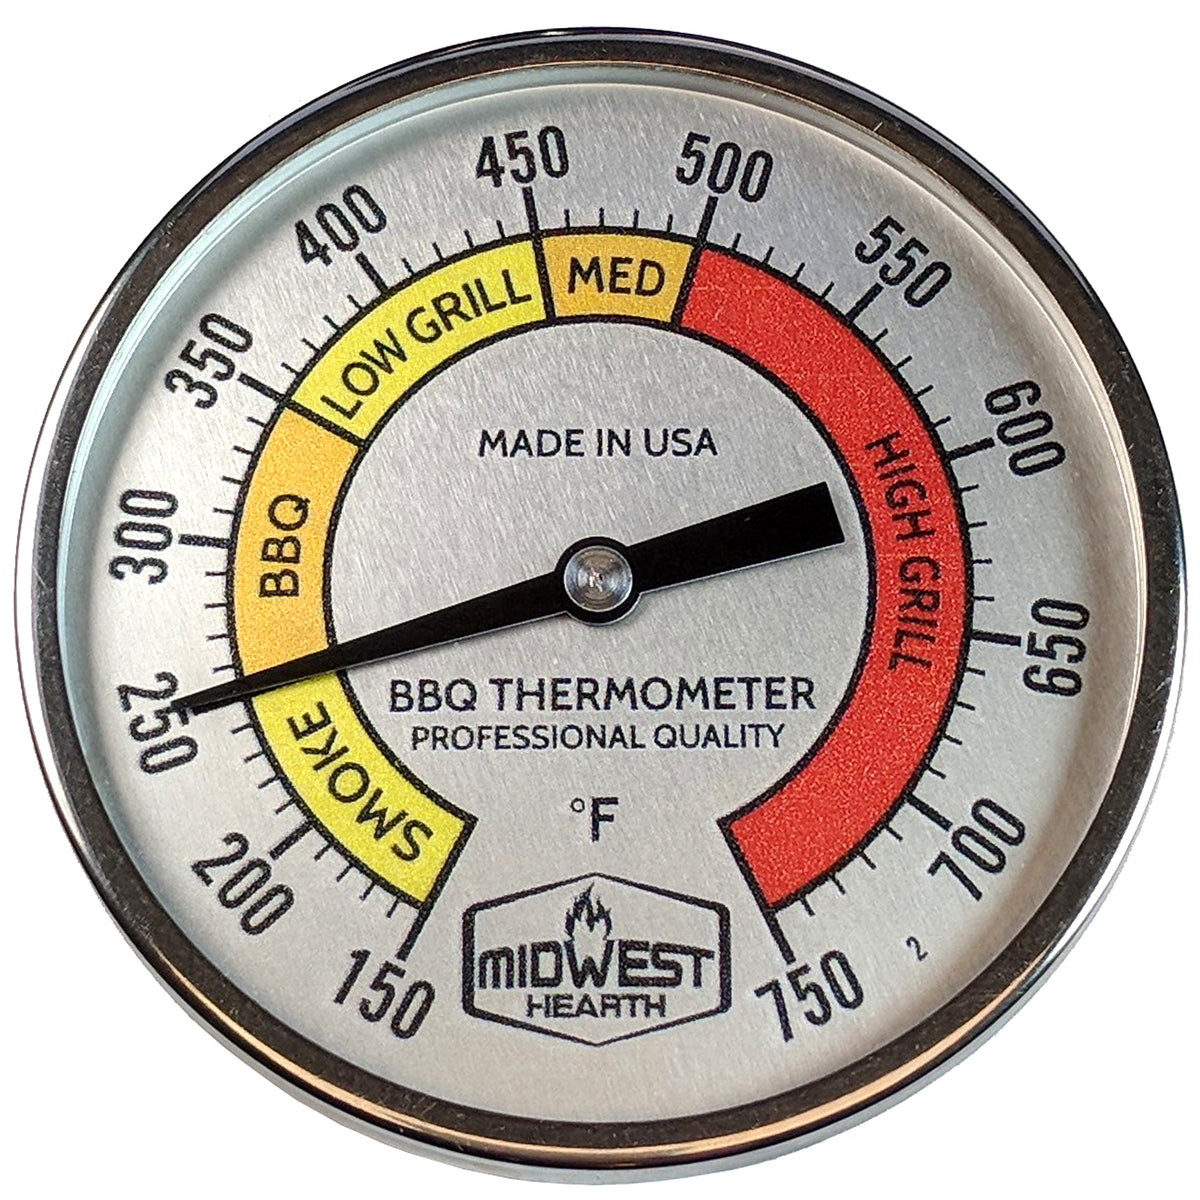 Grill Thermometer 150/750°F (2 Dial, 2.13 Stem) – Midwest Hearth